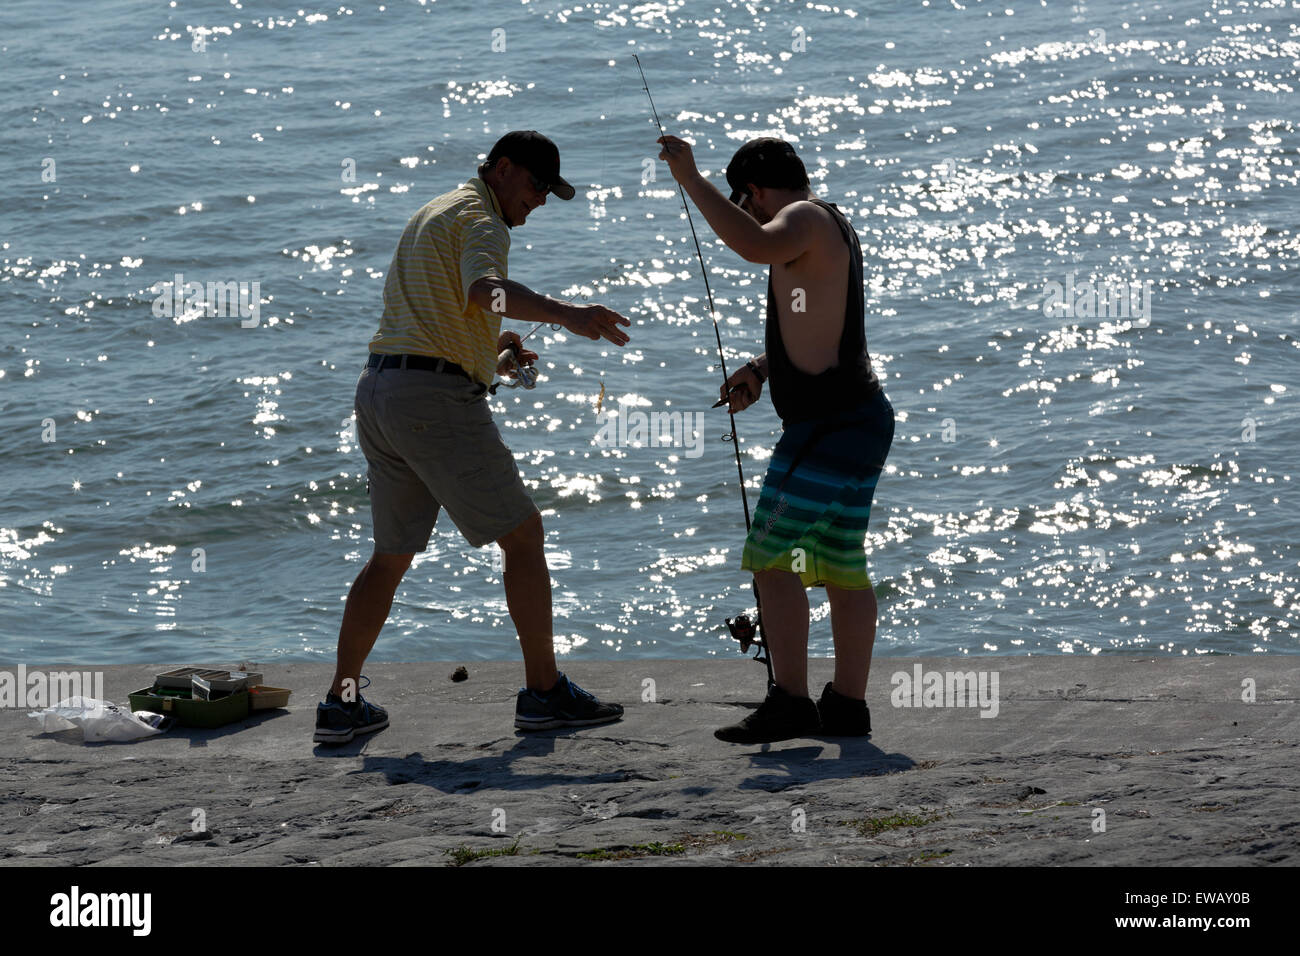 Two anglers with fishing rod as semi silhouette on the beach, Dunedin, Florida Stock Photo